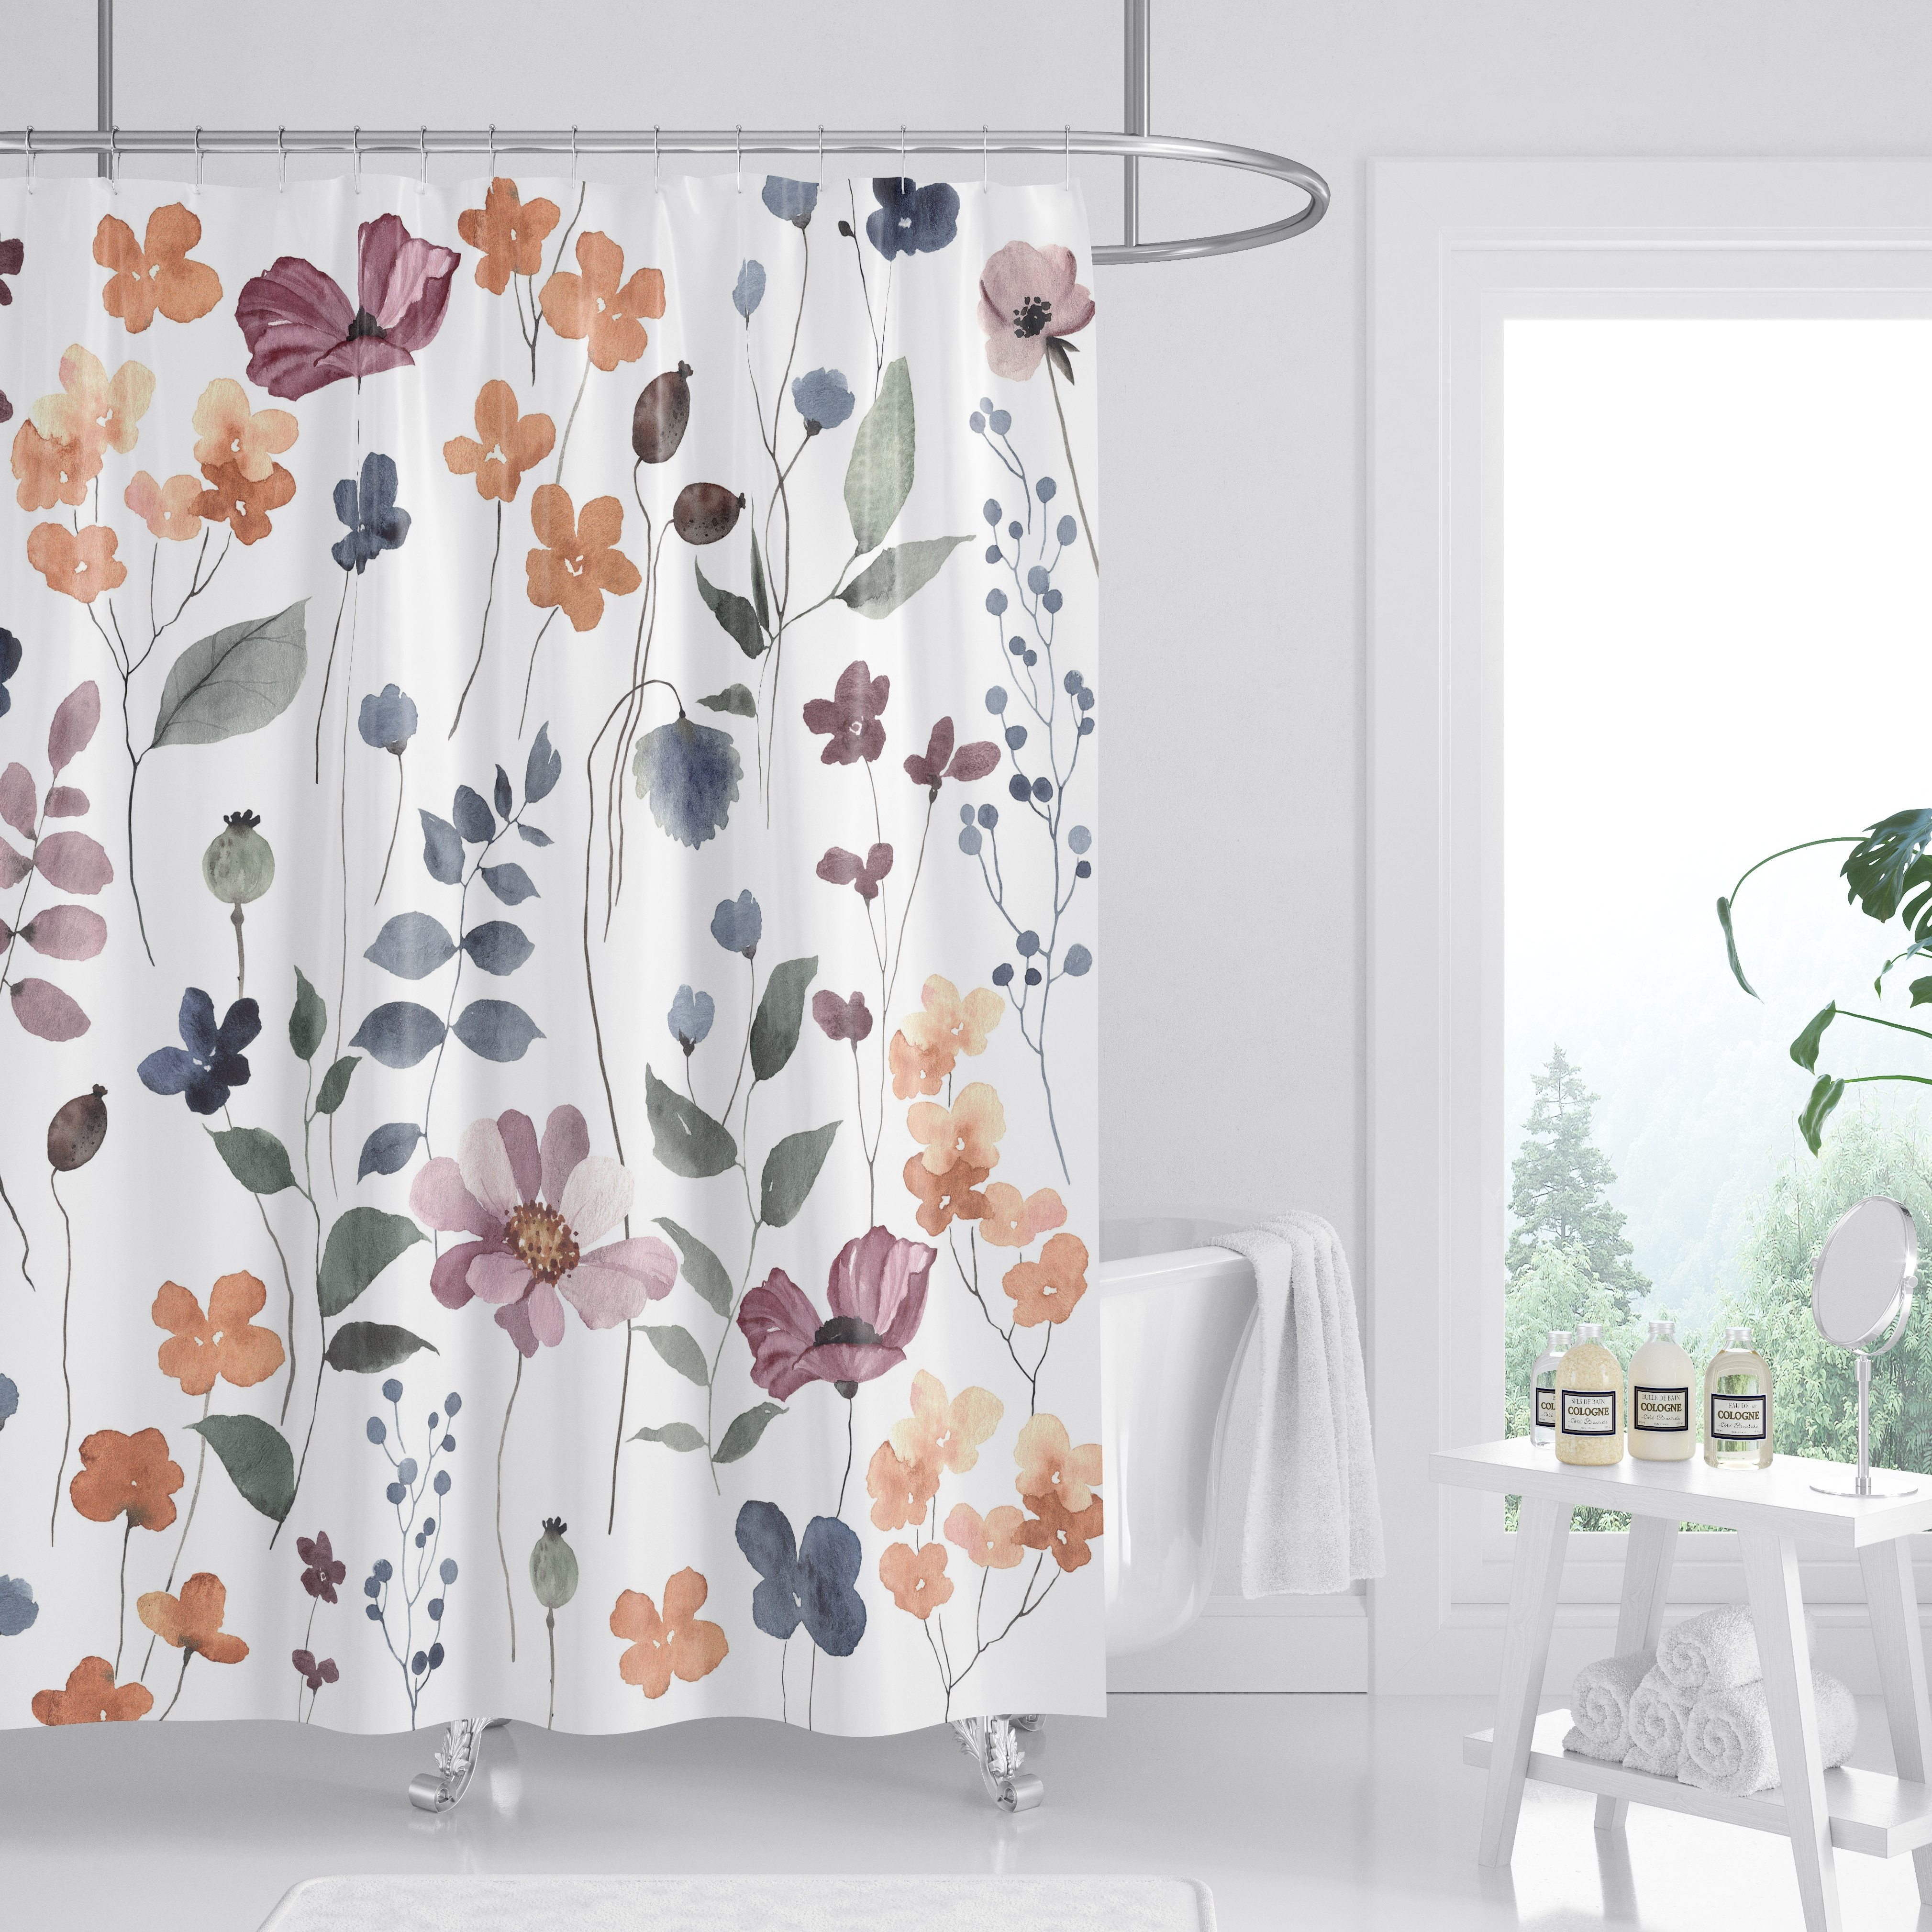 72 in. Ivory and Gray Botanical Floral Shower Curtain